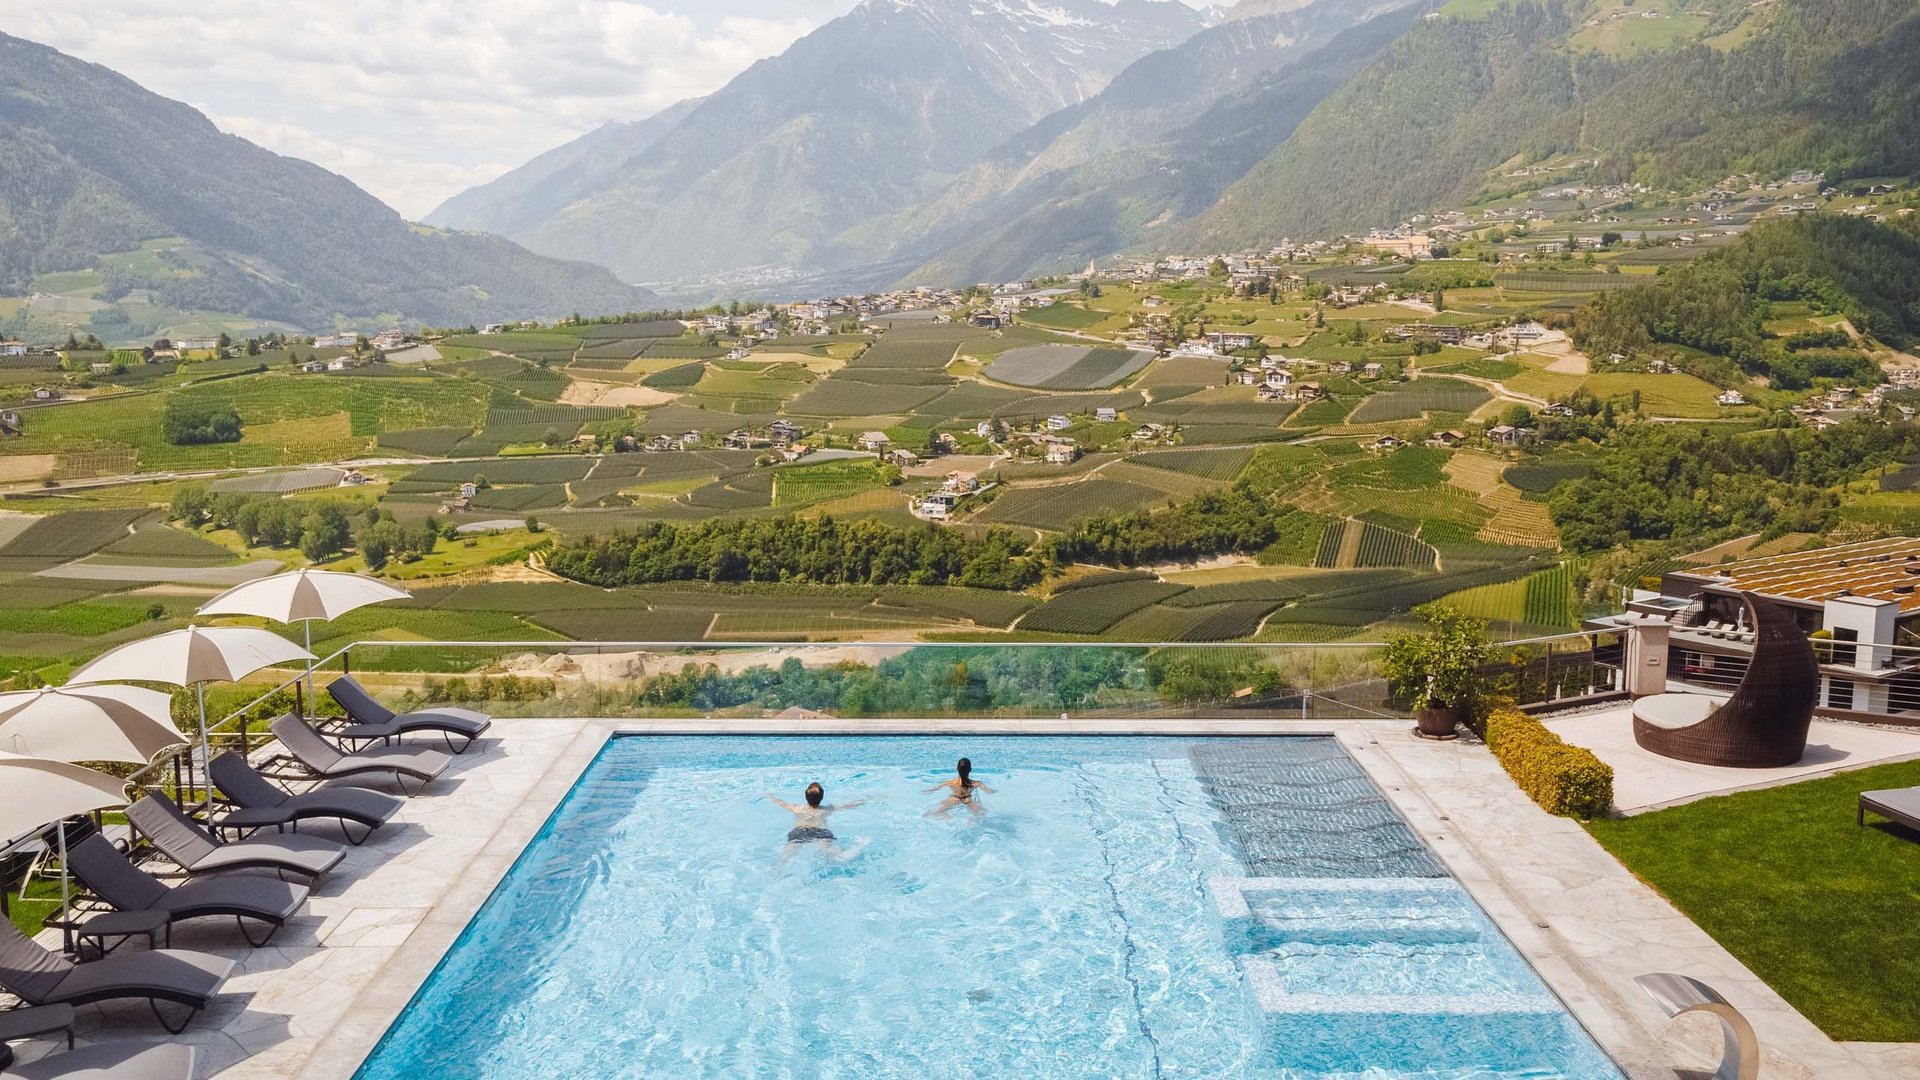 Looking for hotels in Schenna with pools?